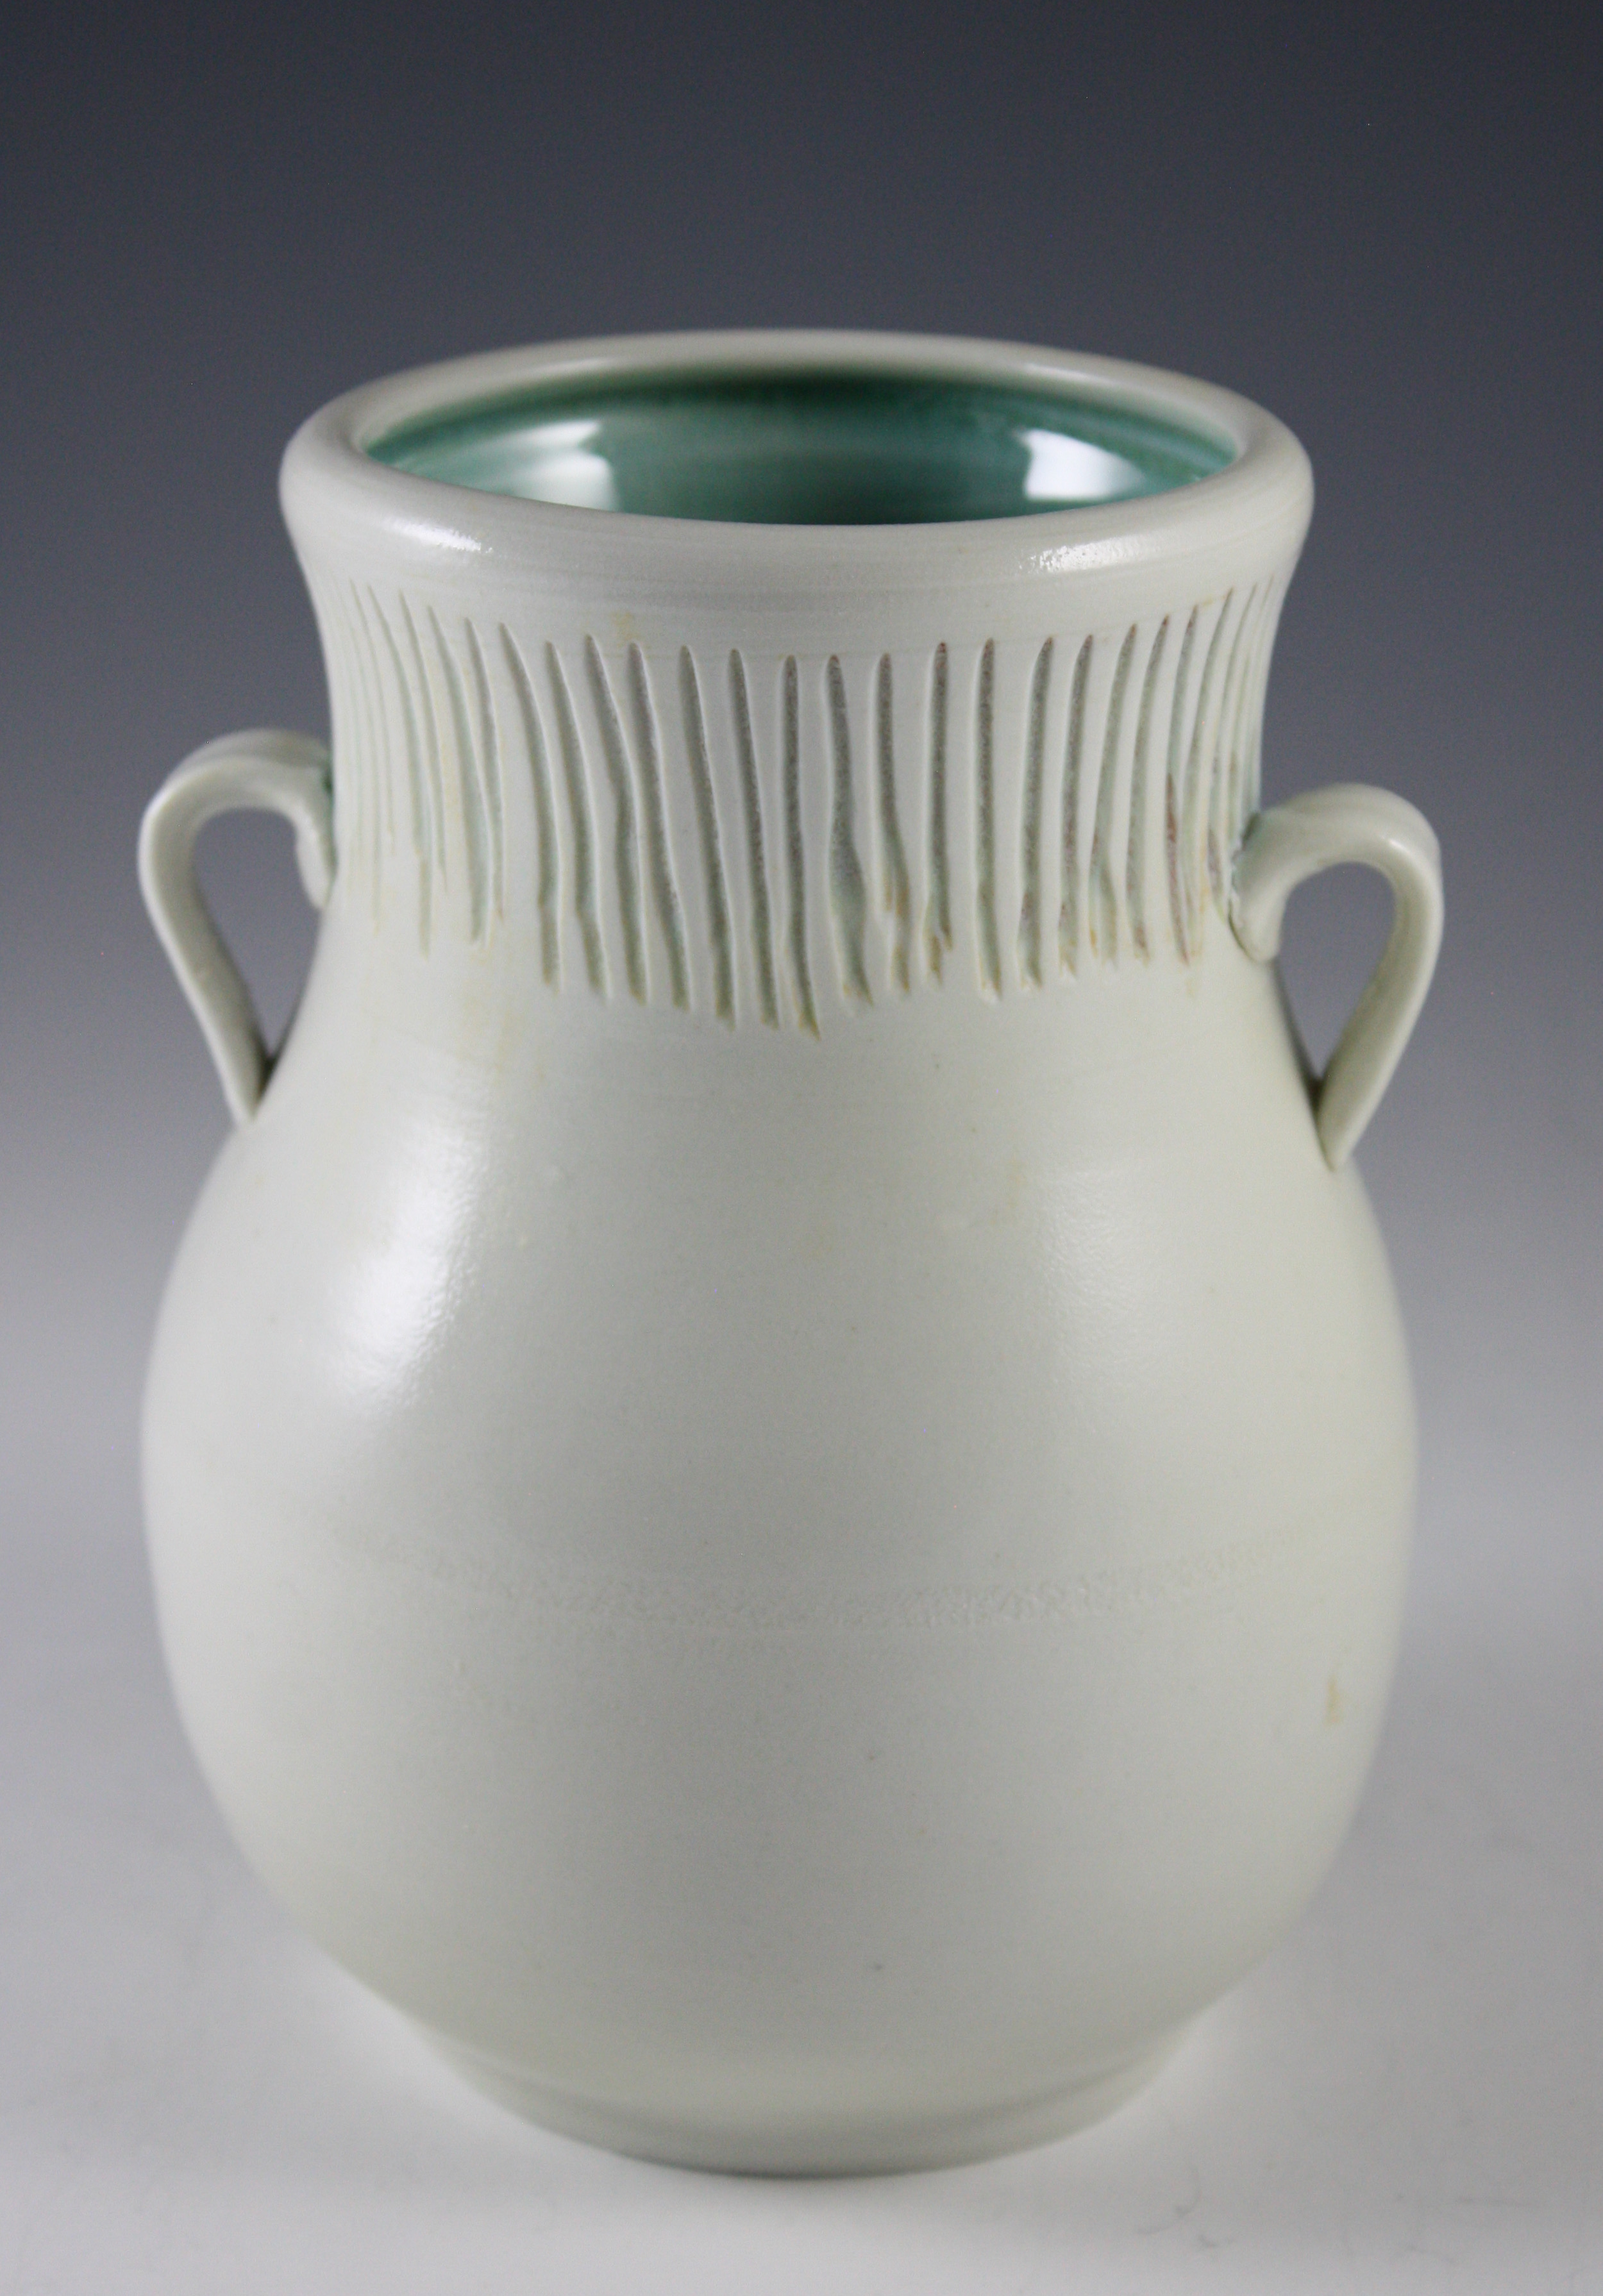 Porcelain Vase with Handles and Carved Neck 21-327